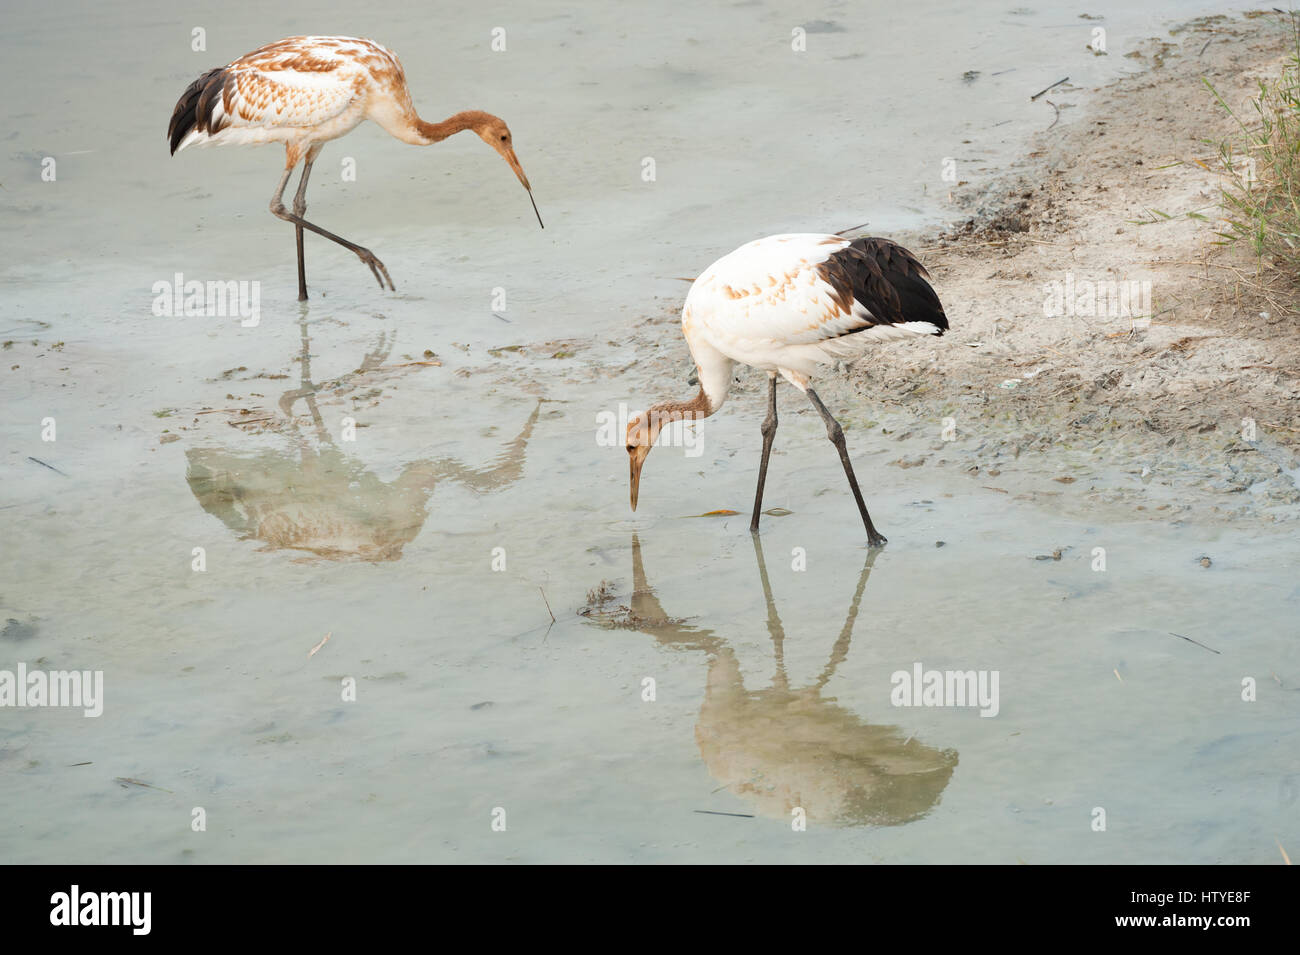 Red-crowned cranes wading in river, Baicheng, Jilin, China Stock Photo